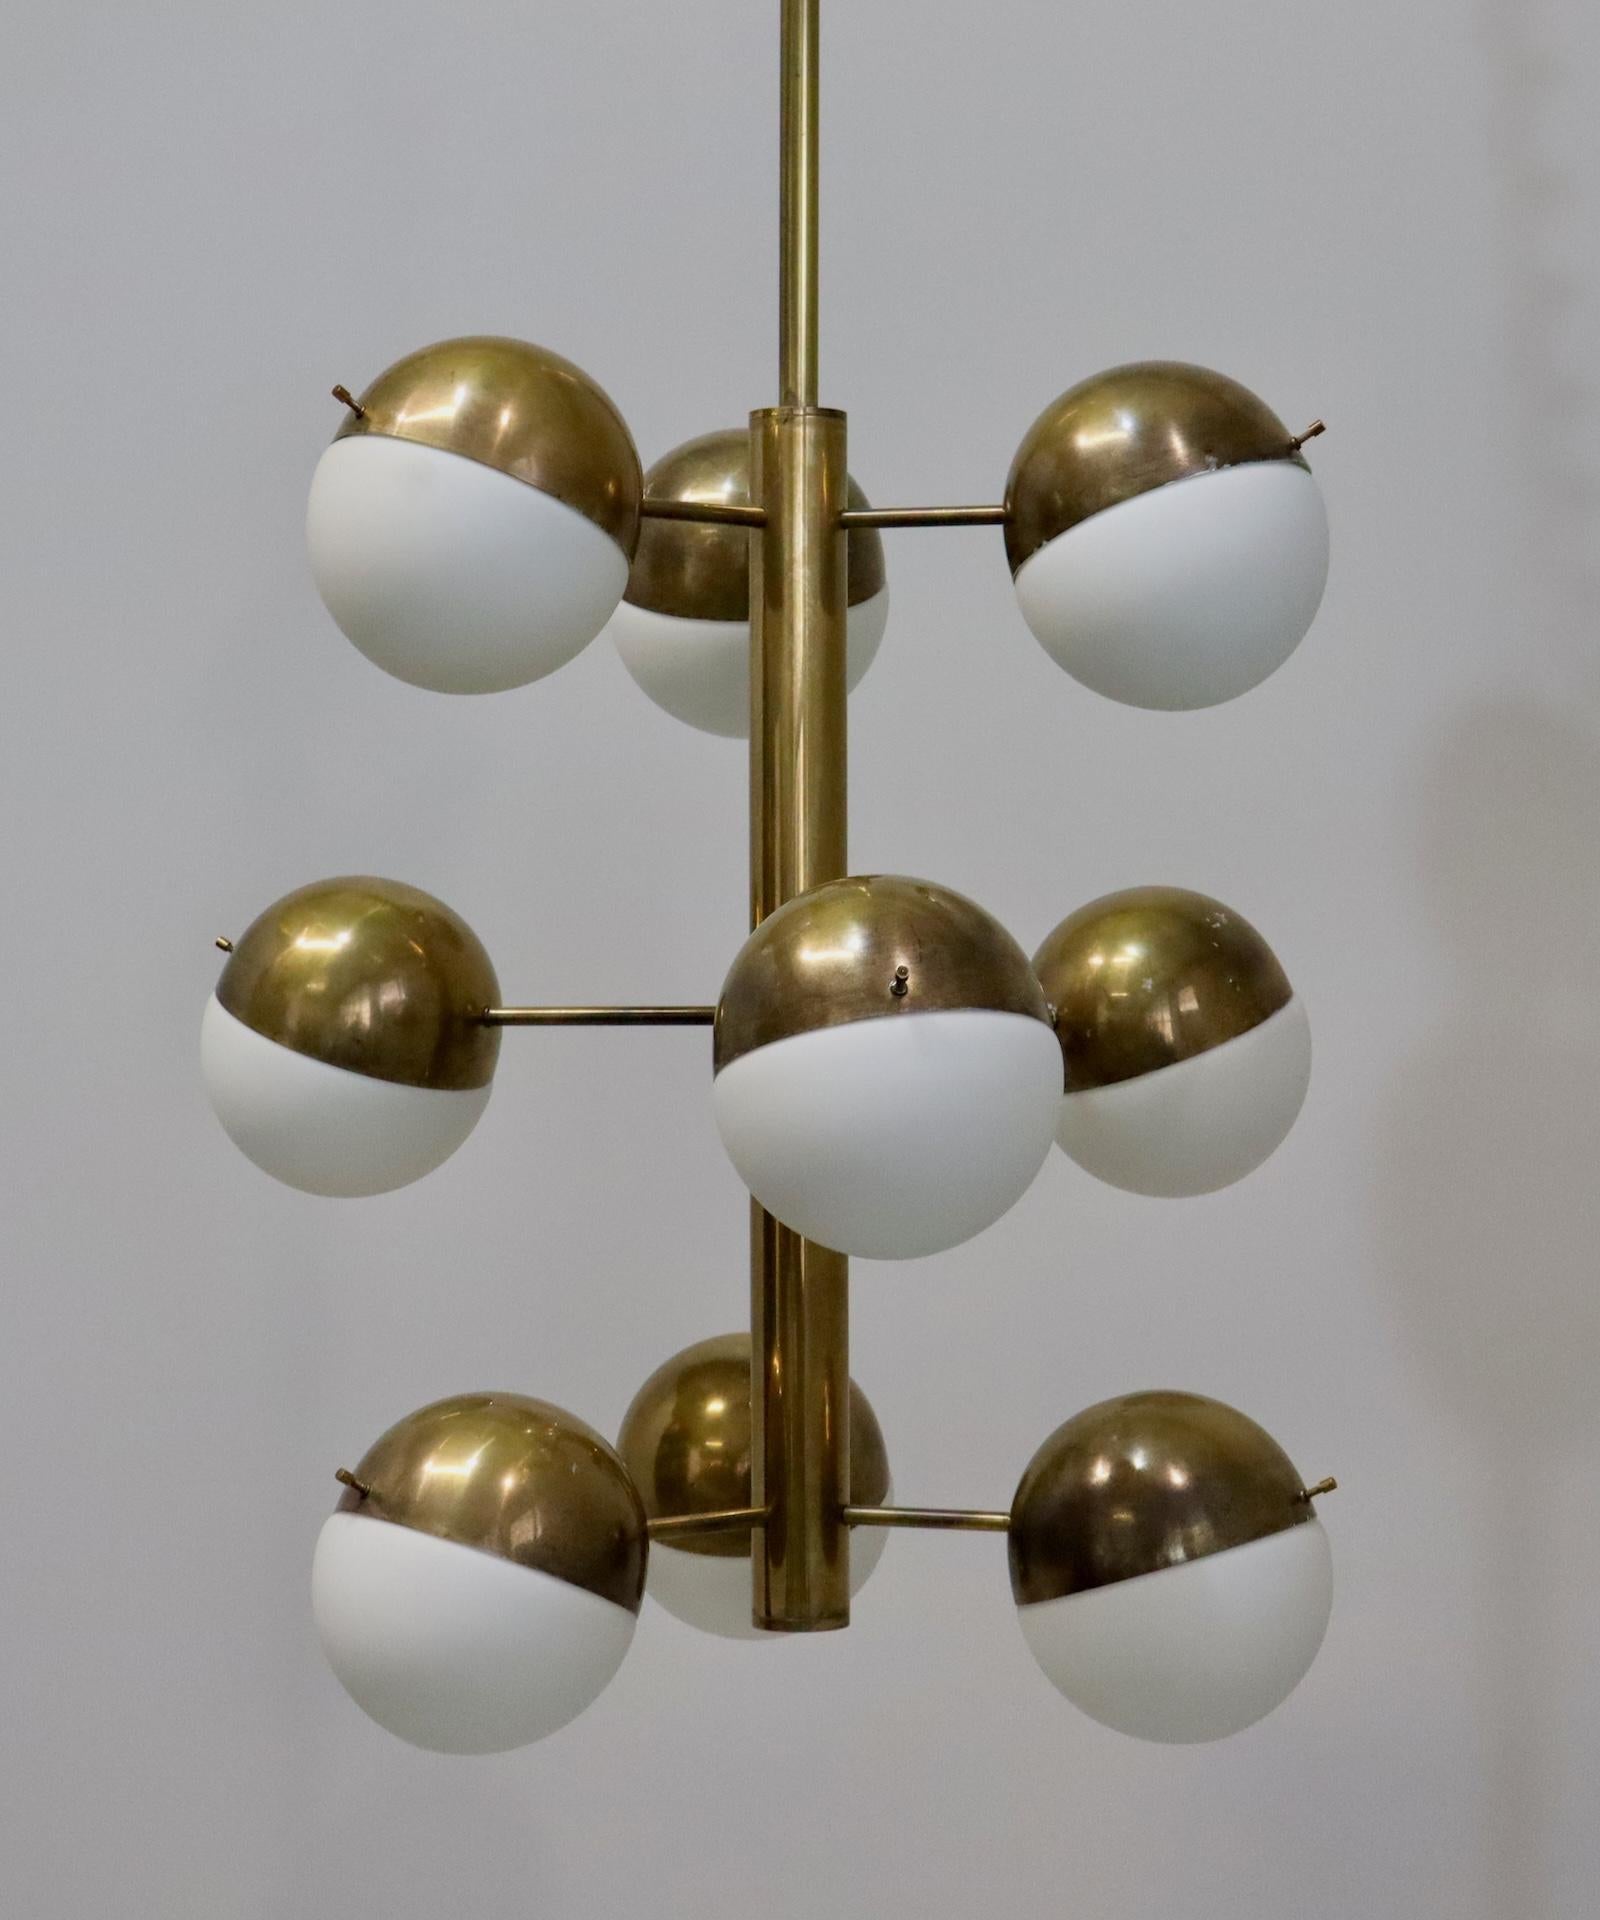 Stilnovo large brass and opal glass pendant chandelier, model 1129, Italy 
It is a chandelier that can surprise with its originality and refinement, produced in few examples and hard to find, it will give elegance and grit to your home environment